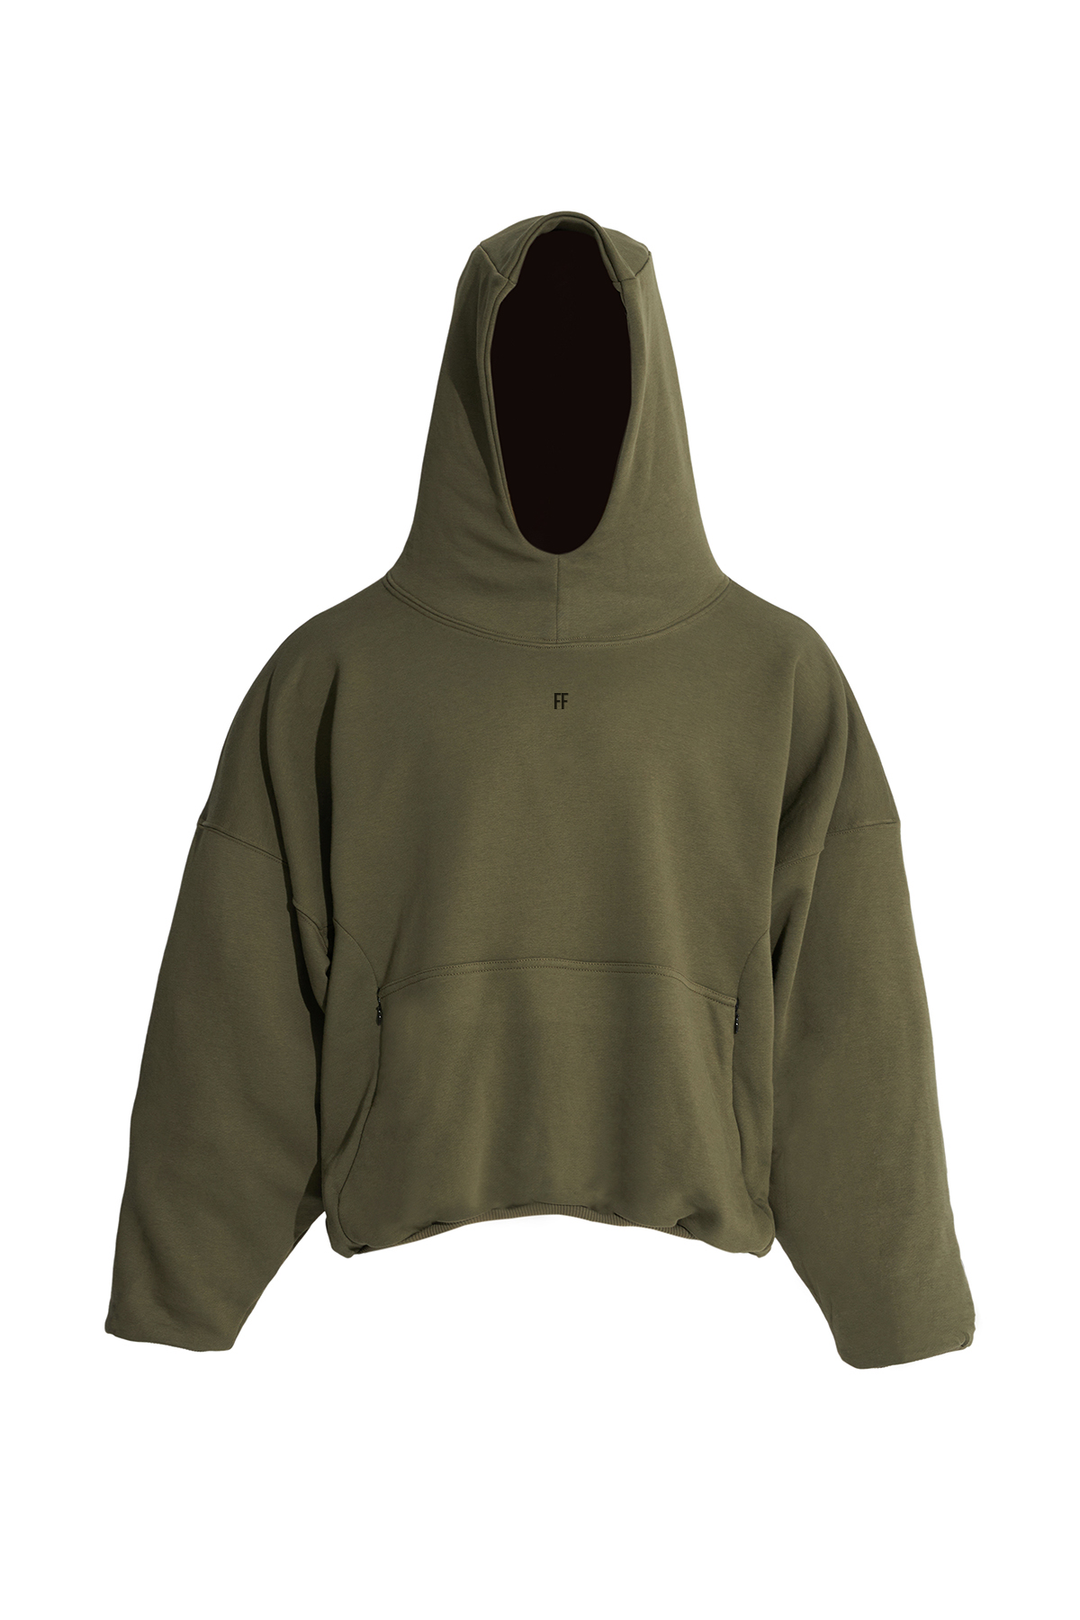 FF / Oversized Double Layer Pullover Hoodie